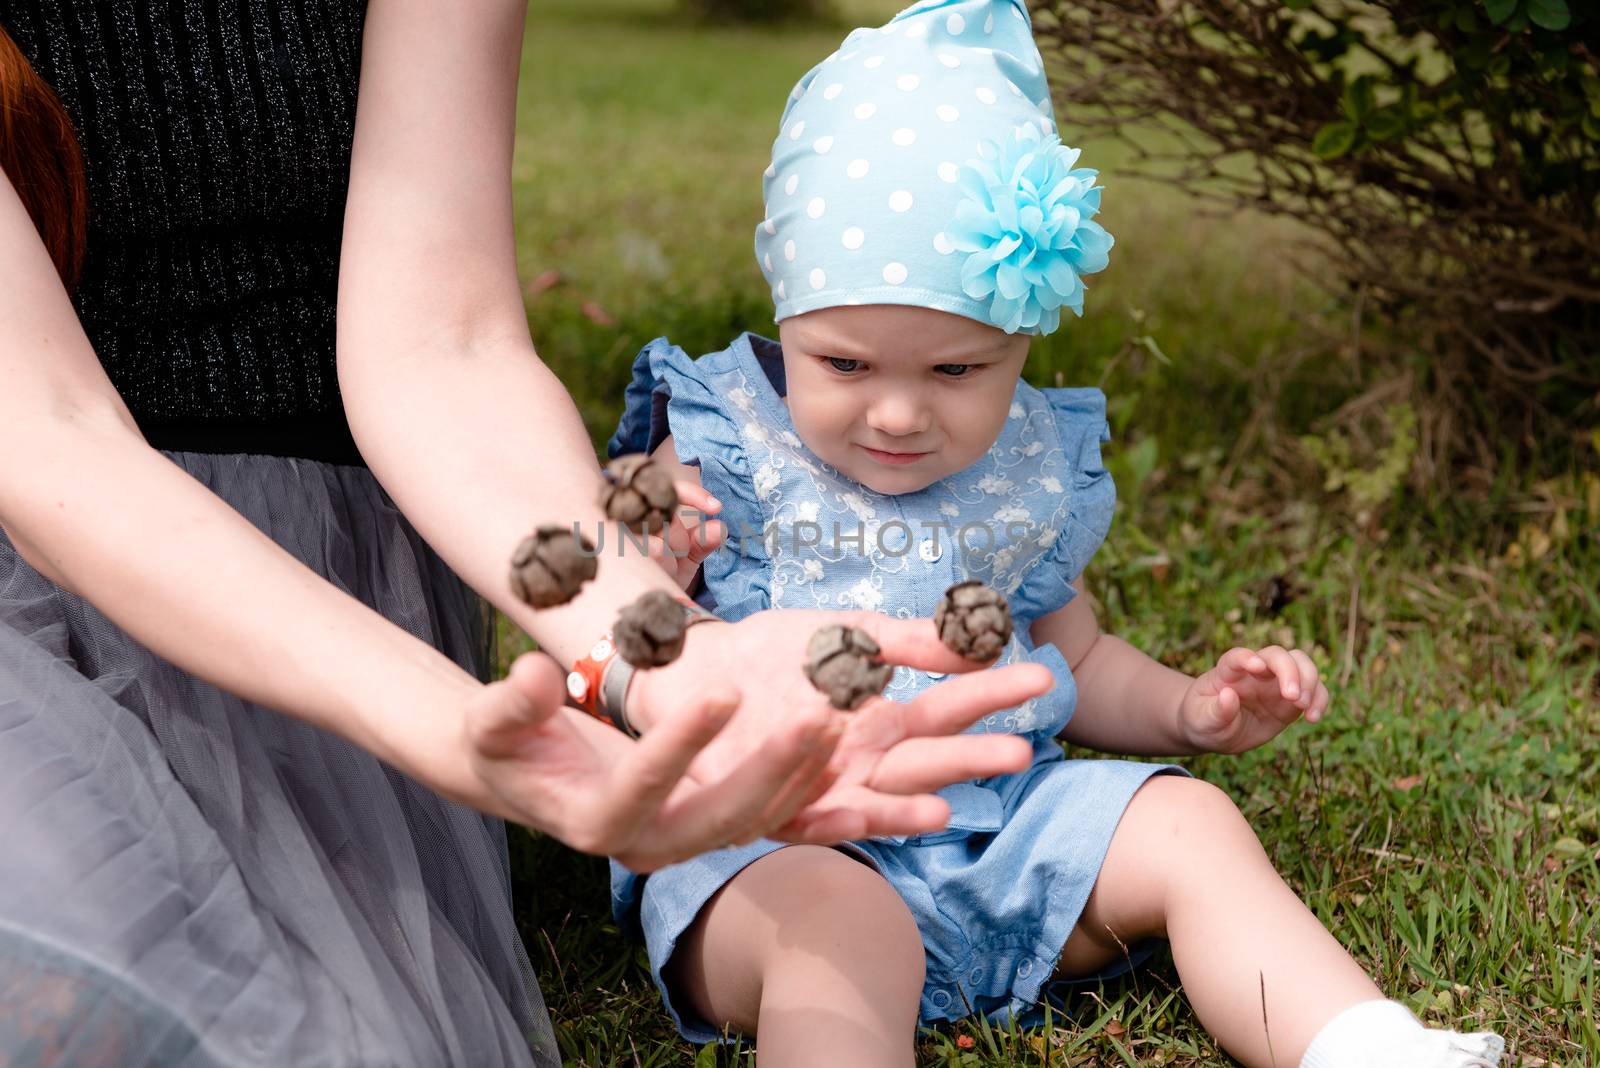 the little girl looks at the flying cones in the hands of her mother with distrust. they sit on the grass in the Park. the child has a blue suit and a hat.